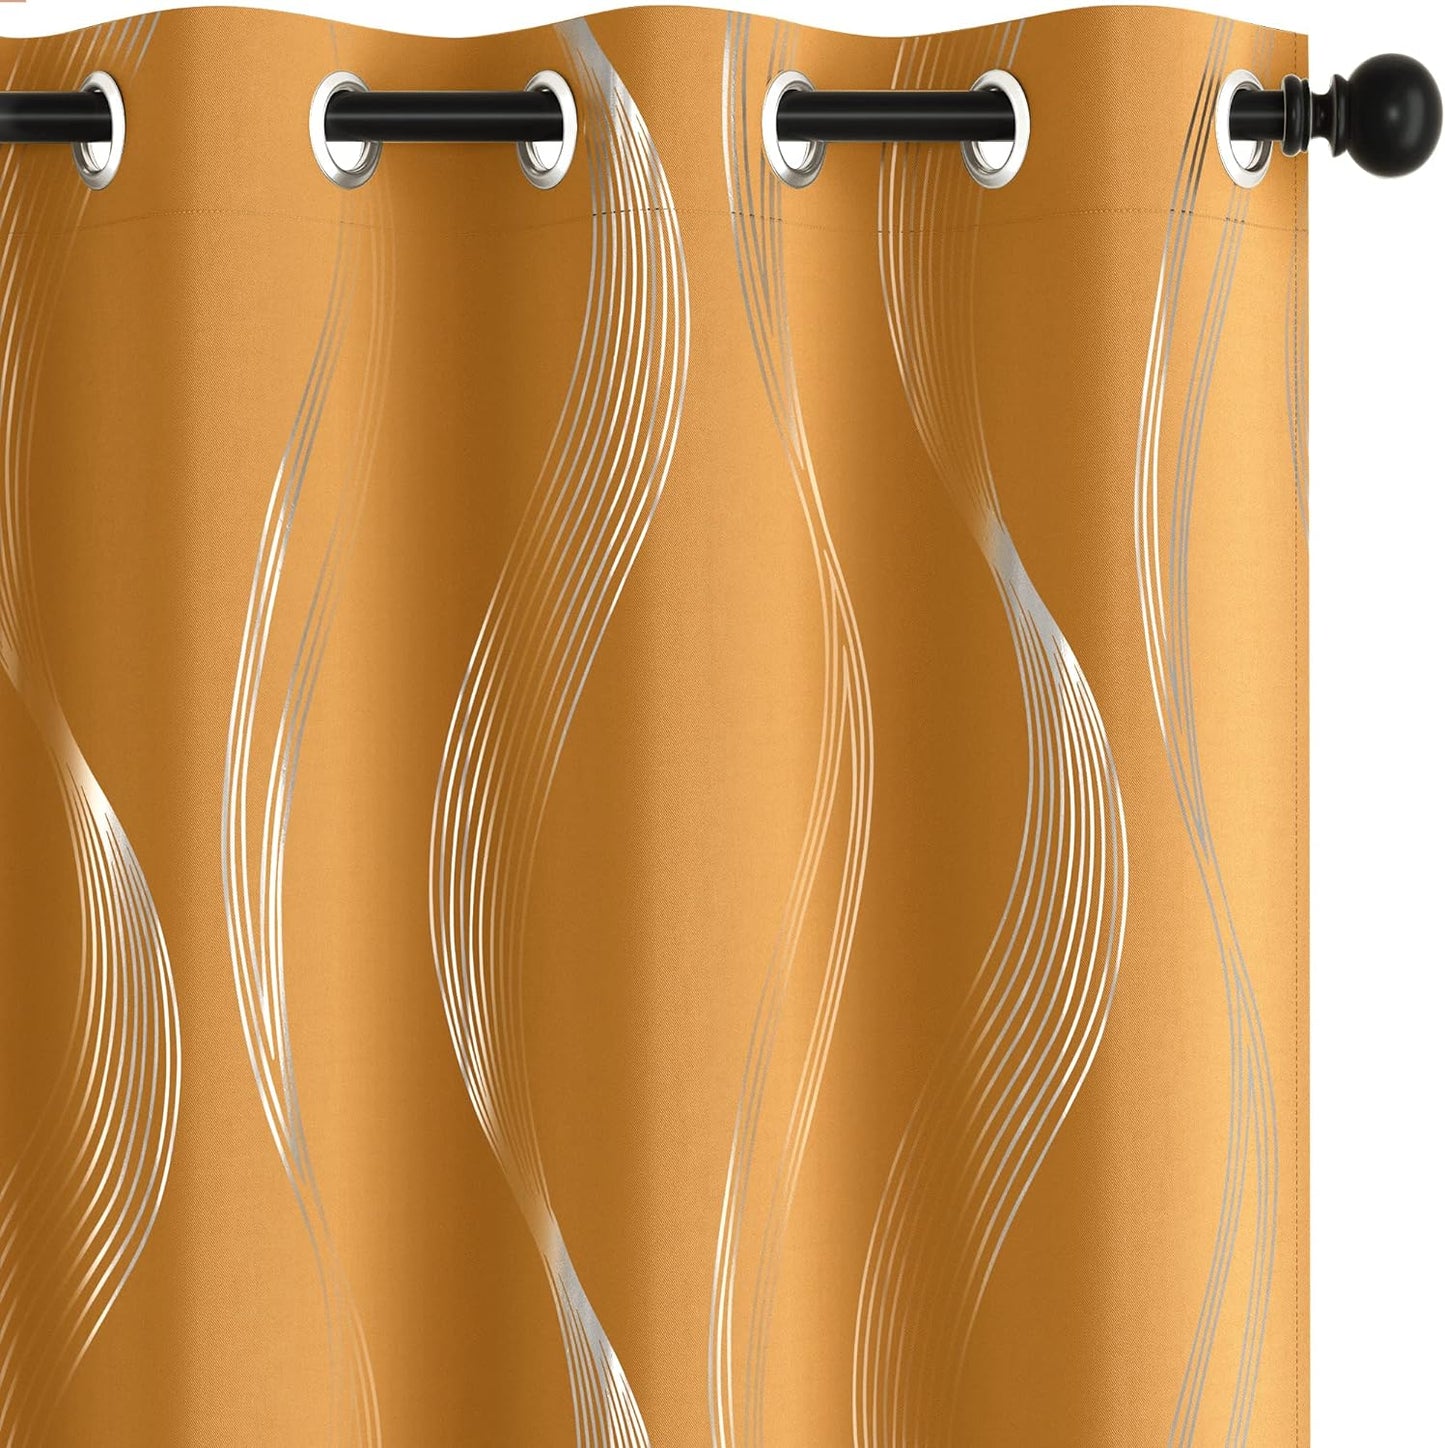 Deconovo Thermal Insulated Blackout Curtains, Room Darkening Foil Print Wave Window Drapes, Grommet Curtains for Bedroom, 42X90 Inch, Orange Flame, 2 Panels  Deconovo Grommet/Orange Flame 52X108 Inch 